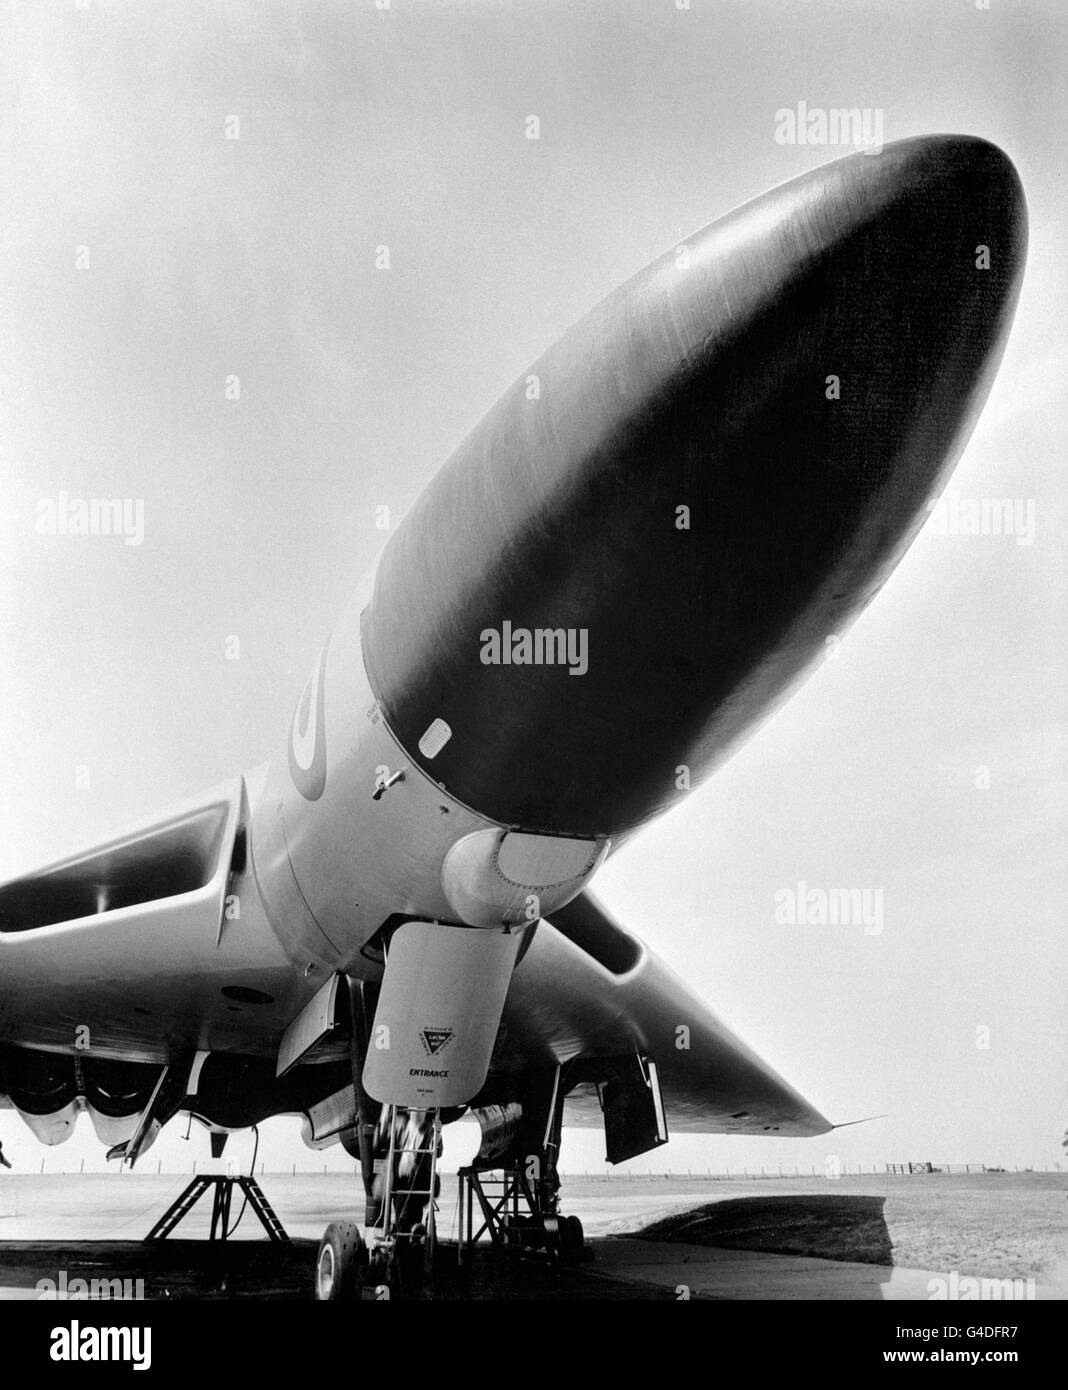 Vulcan bomber Black and White Stock Photos u0026 Images - Alamy